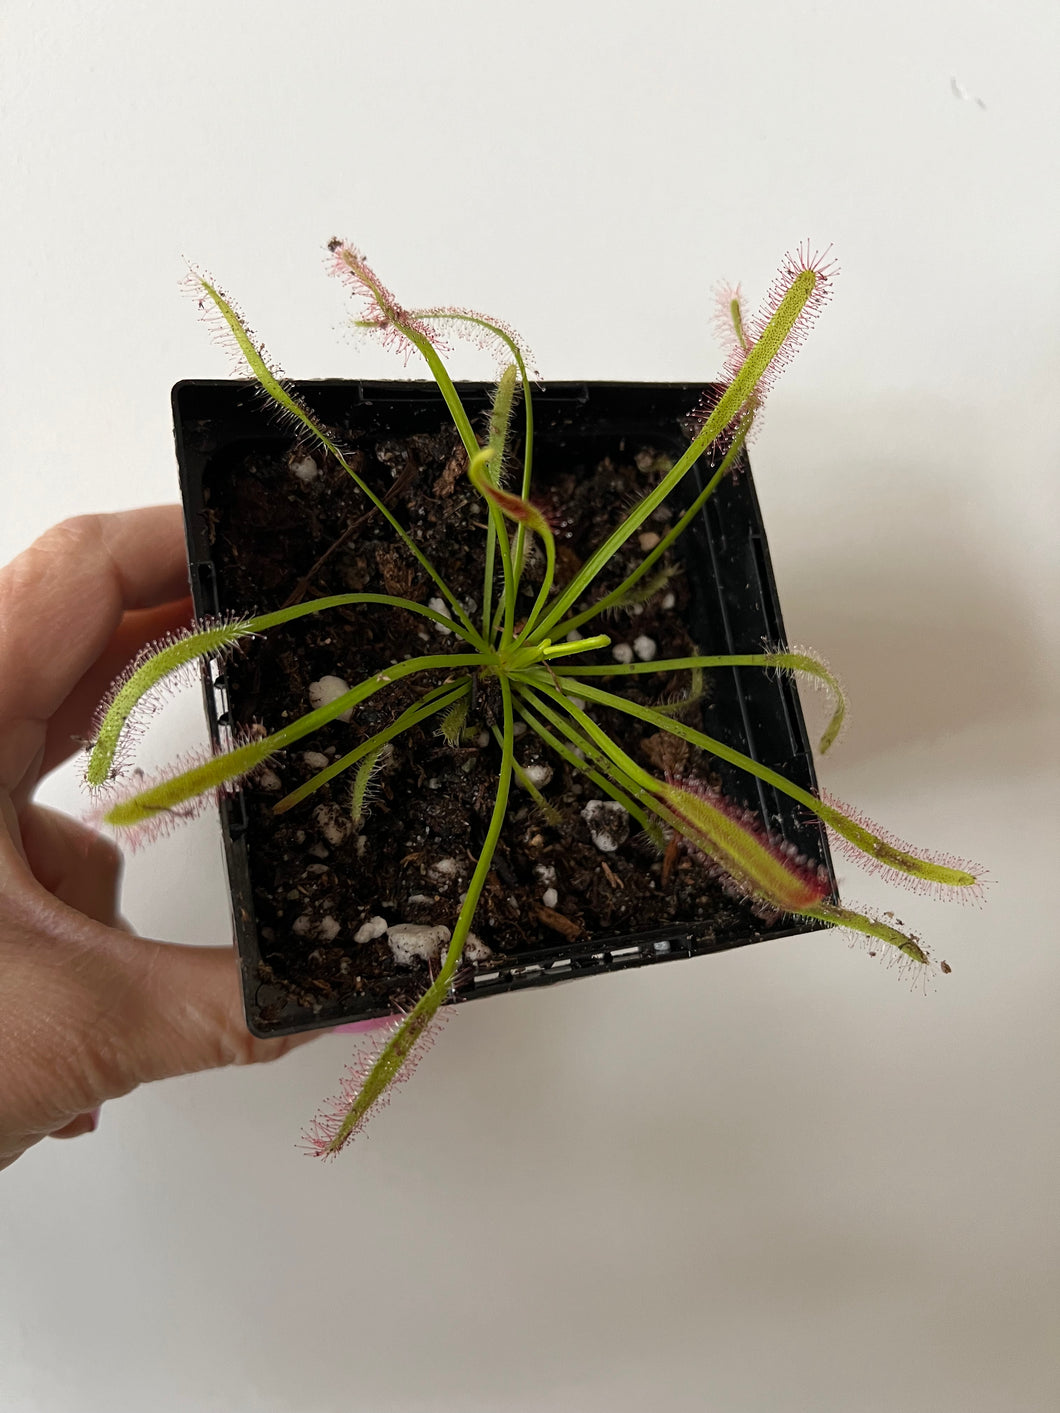 Sundew Capensis Typical